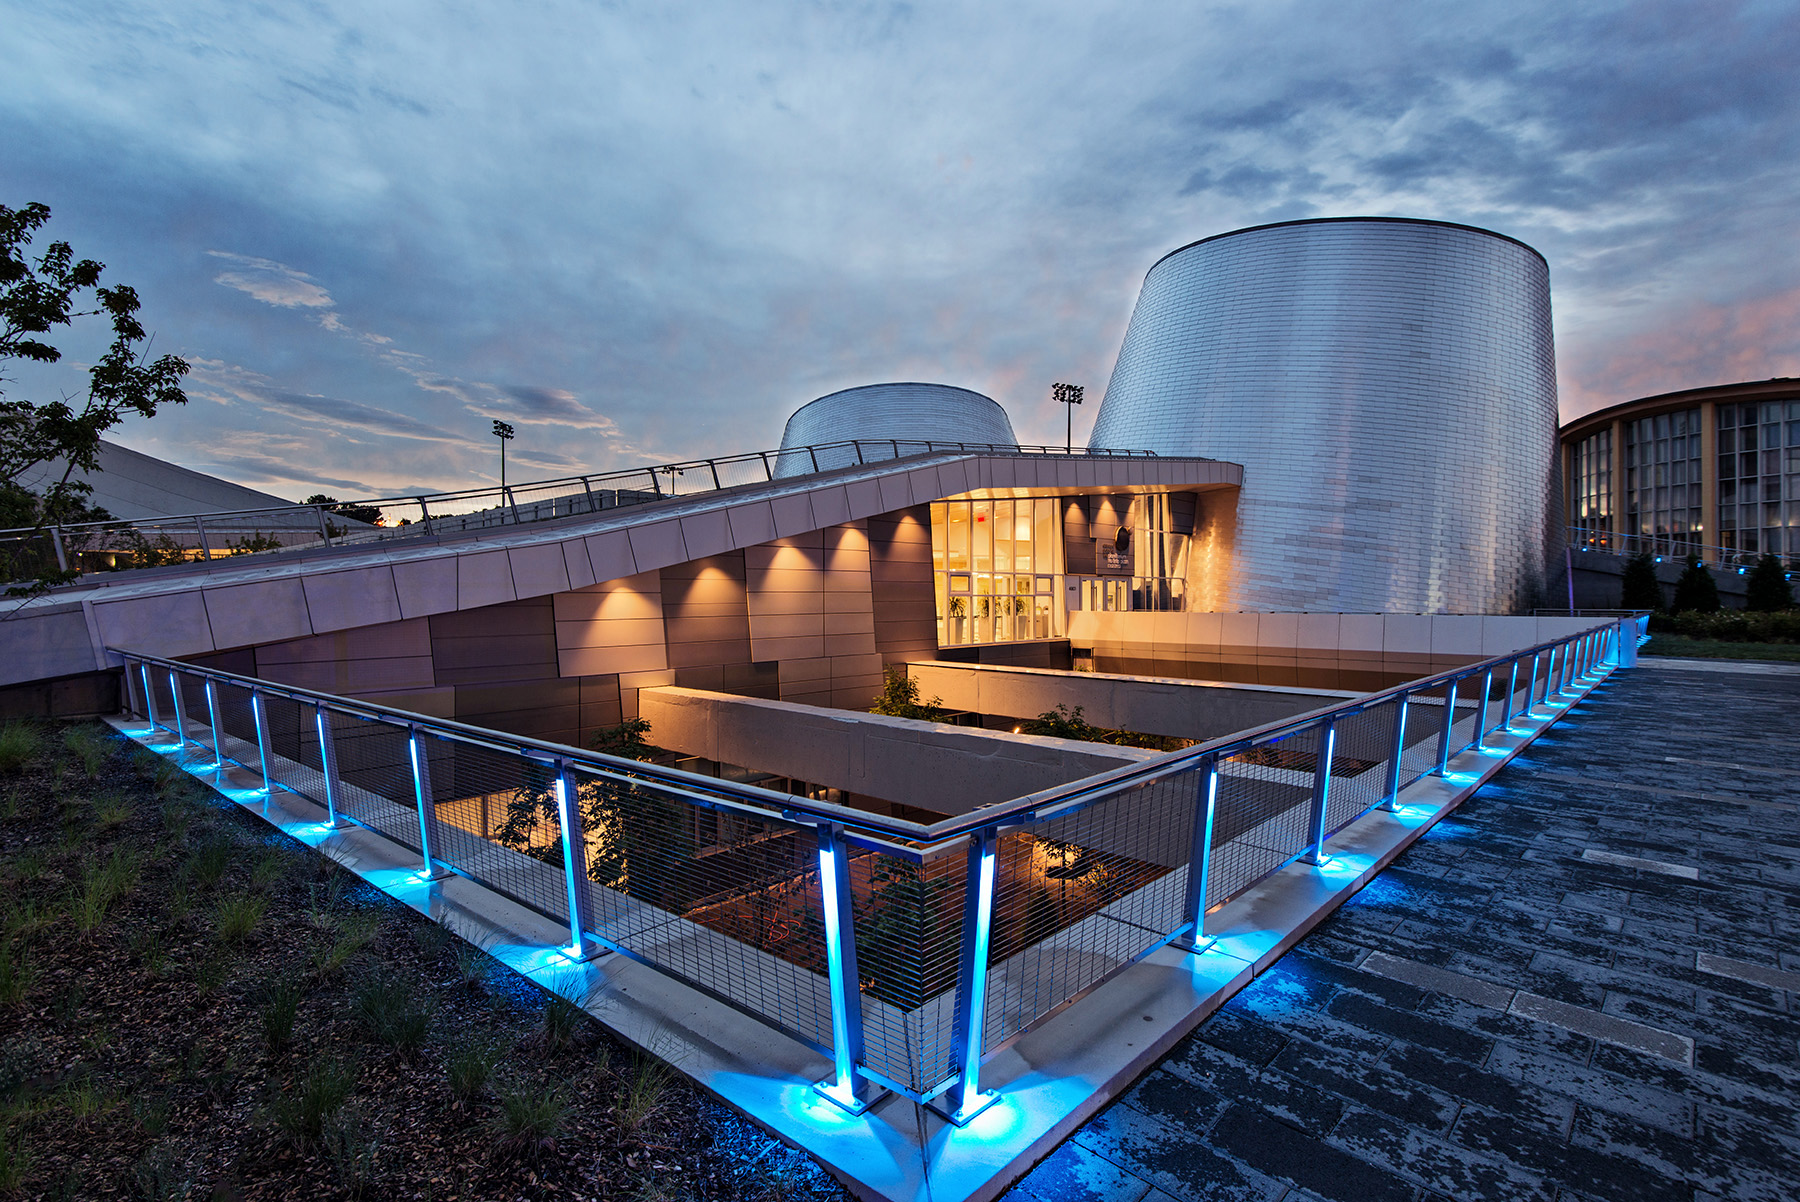 Architecture Photography: Montreal Rio Tinto Alcan Planetarium at the blue hour